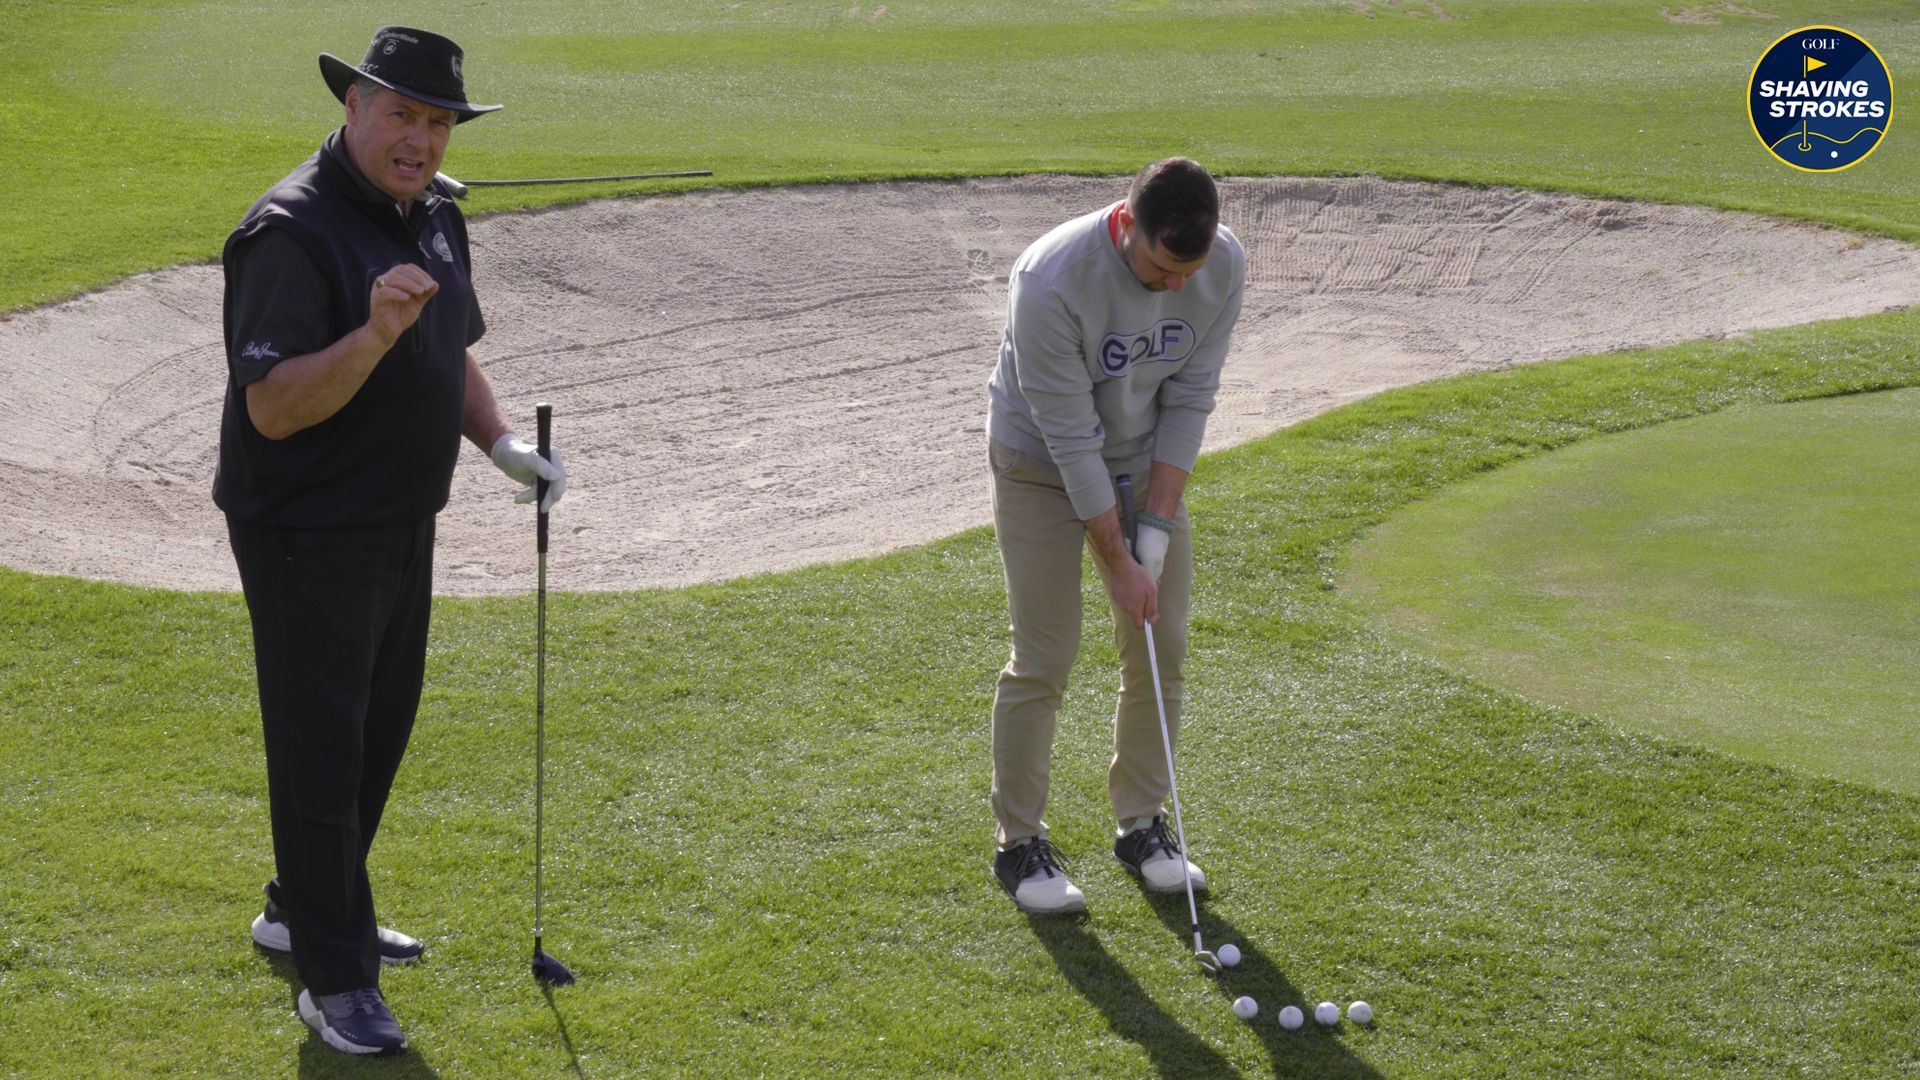 Use this alternative chipping approach for better control around the greens